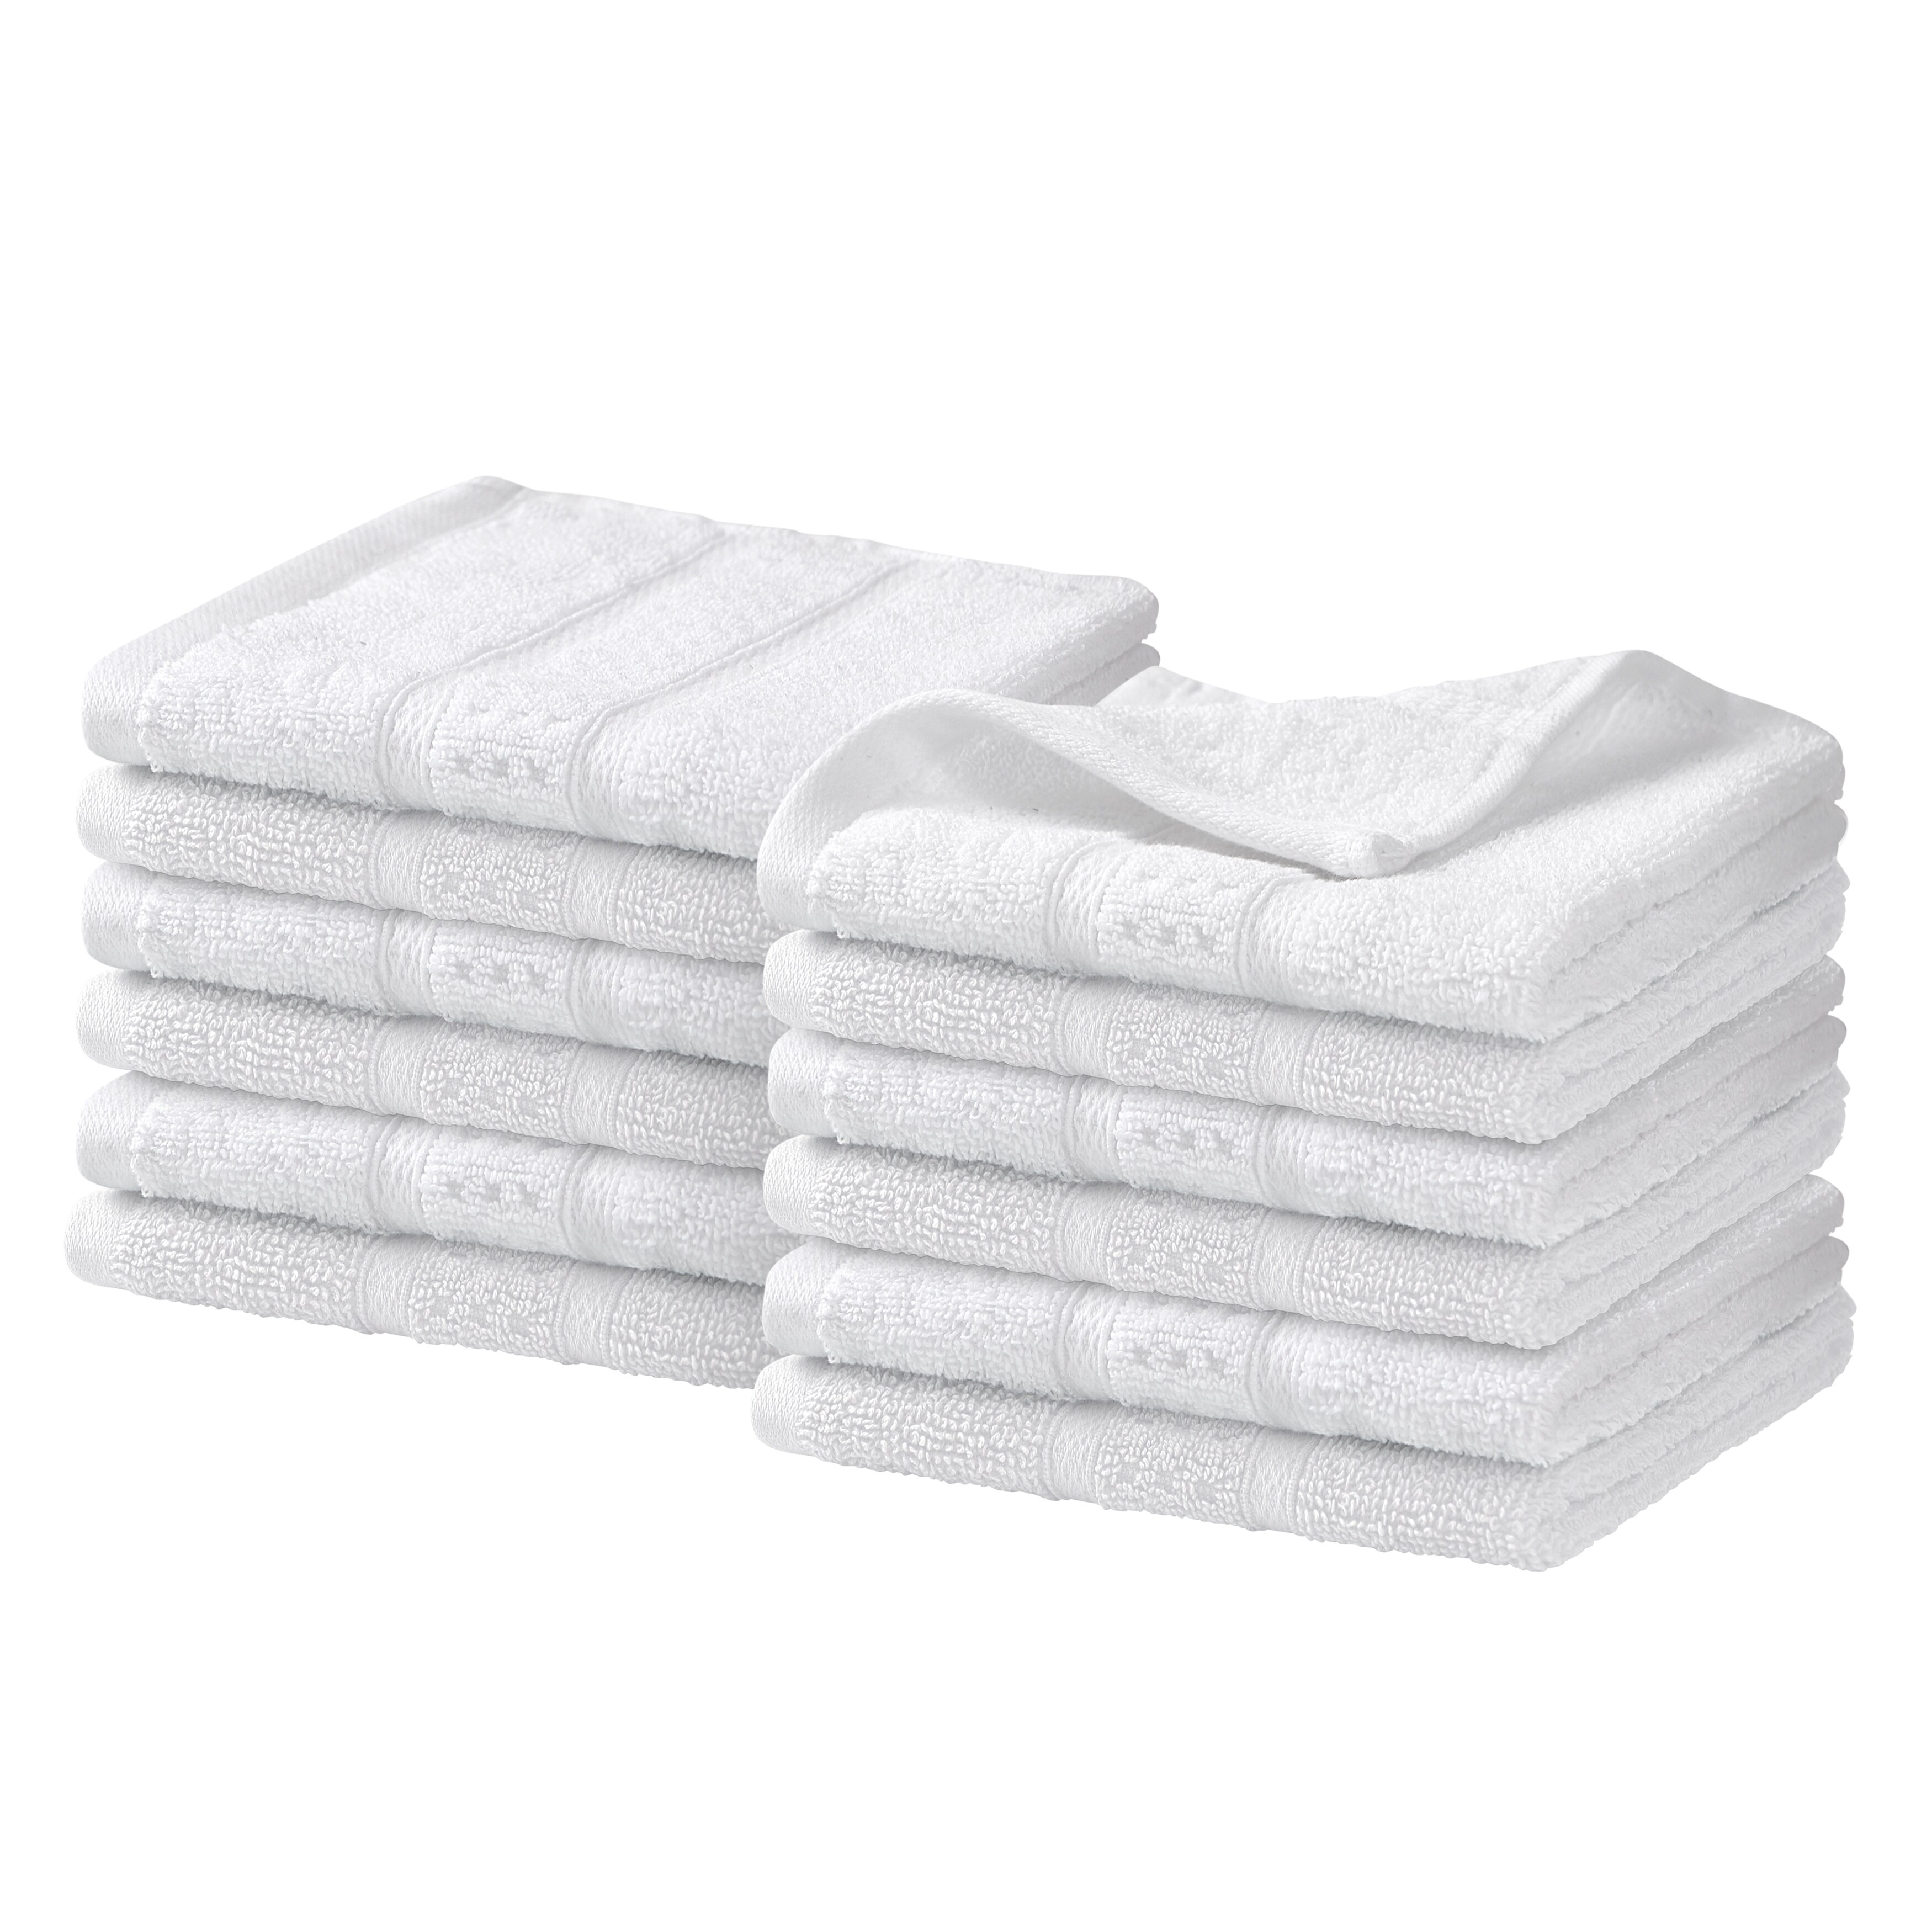 https://ak1.ostkcdn.com/images/products/is/images/direct/b1f9cf6cfabe86d05f9a1355ccf5c098fff79801/Nautica-Oceane-Solid-Wellness-Towel-Collection.jpg